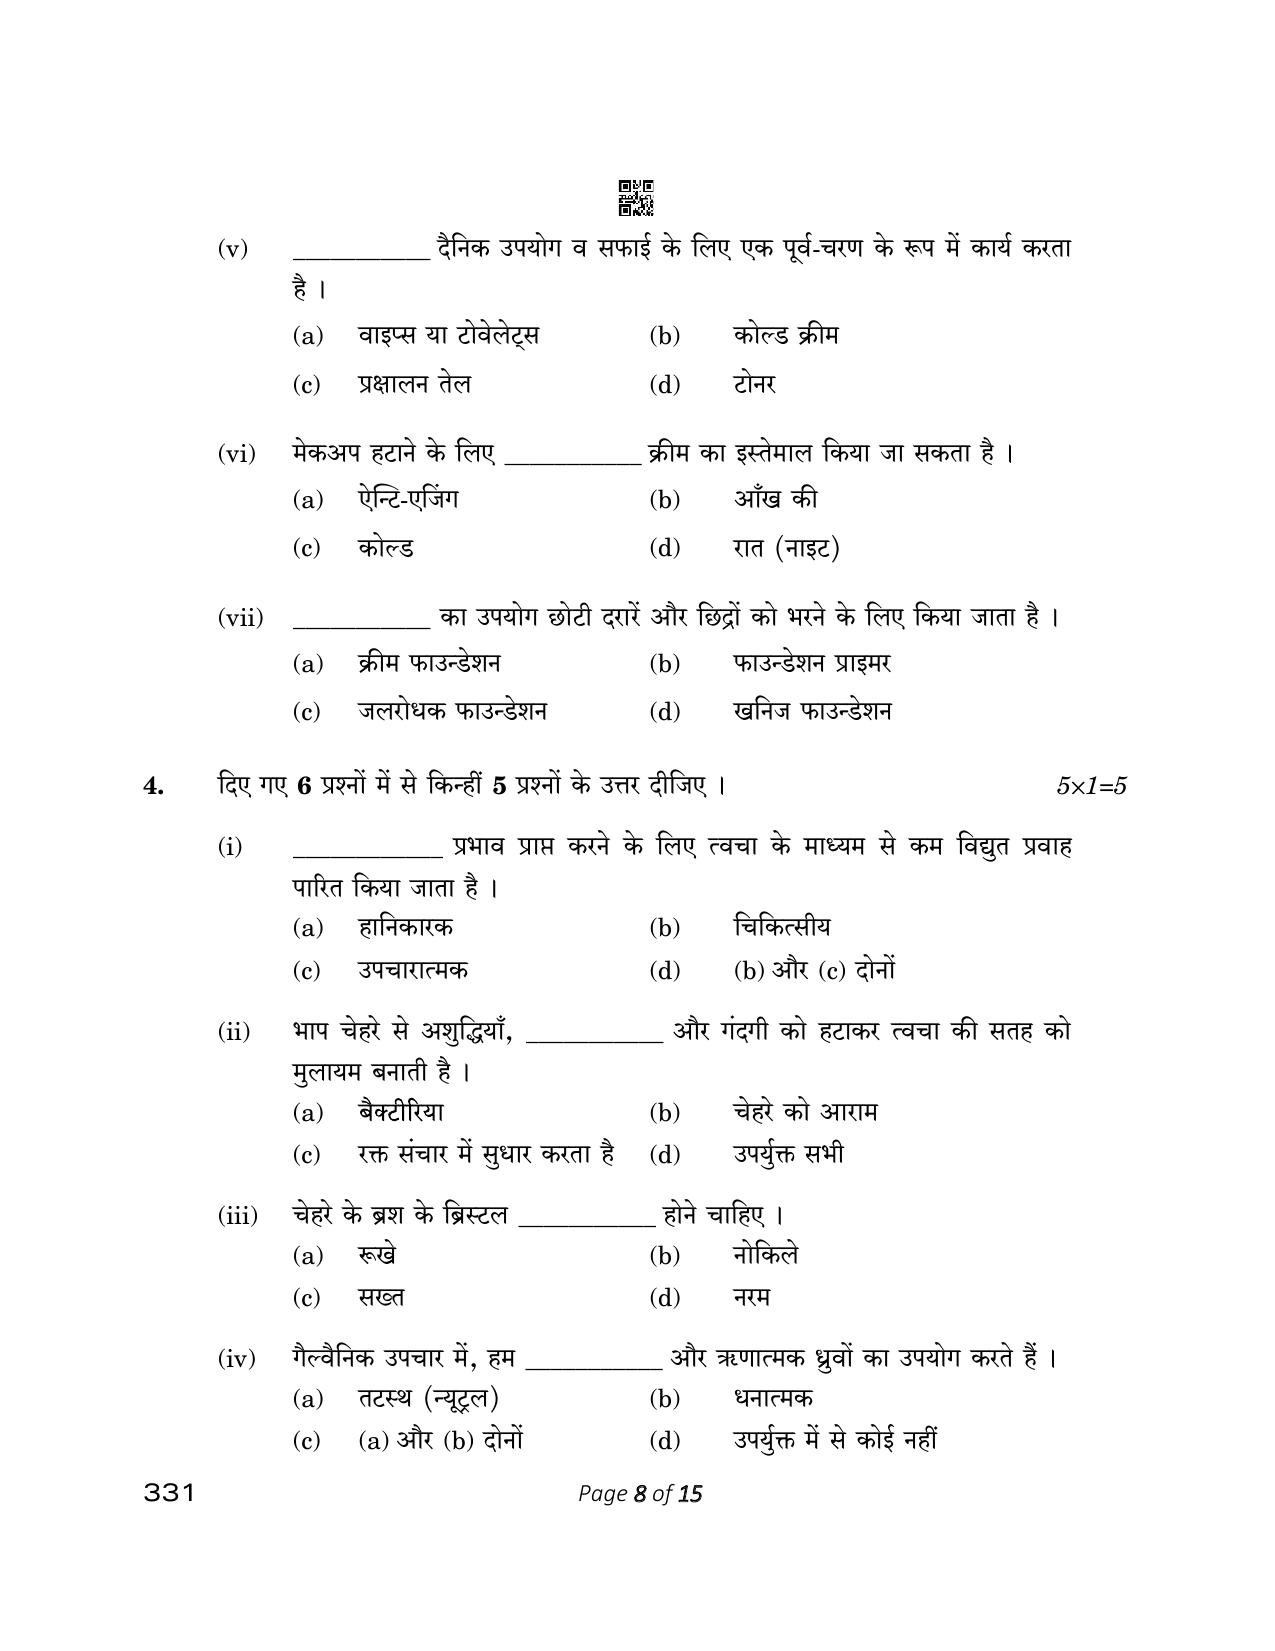 CBSE Class 12 331 Beauty And Wellness 2023 Question Paper - Page 8